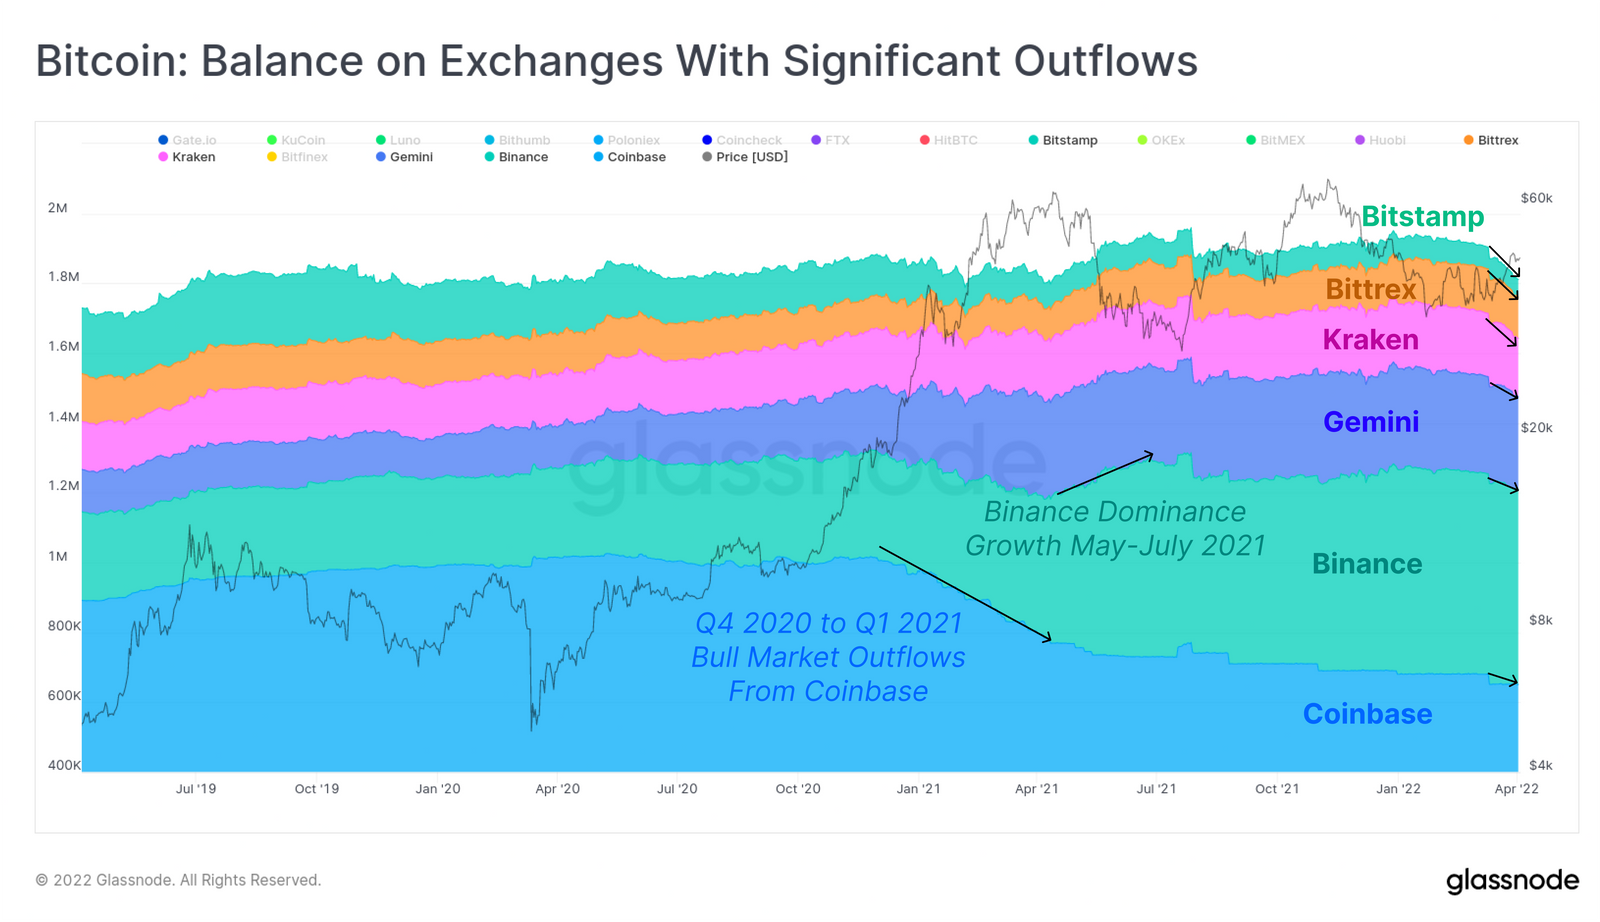 Bitcoin: Balance on Exchanges With Significant Outflows